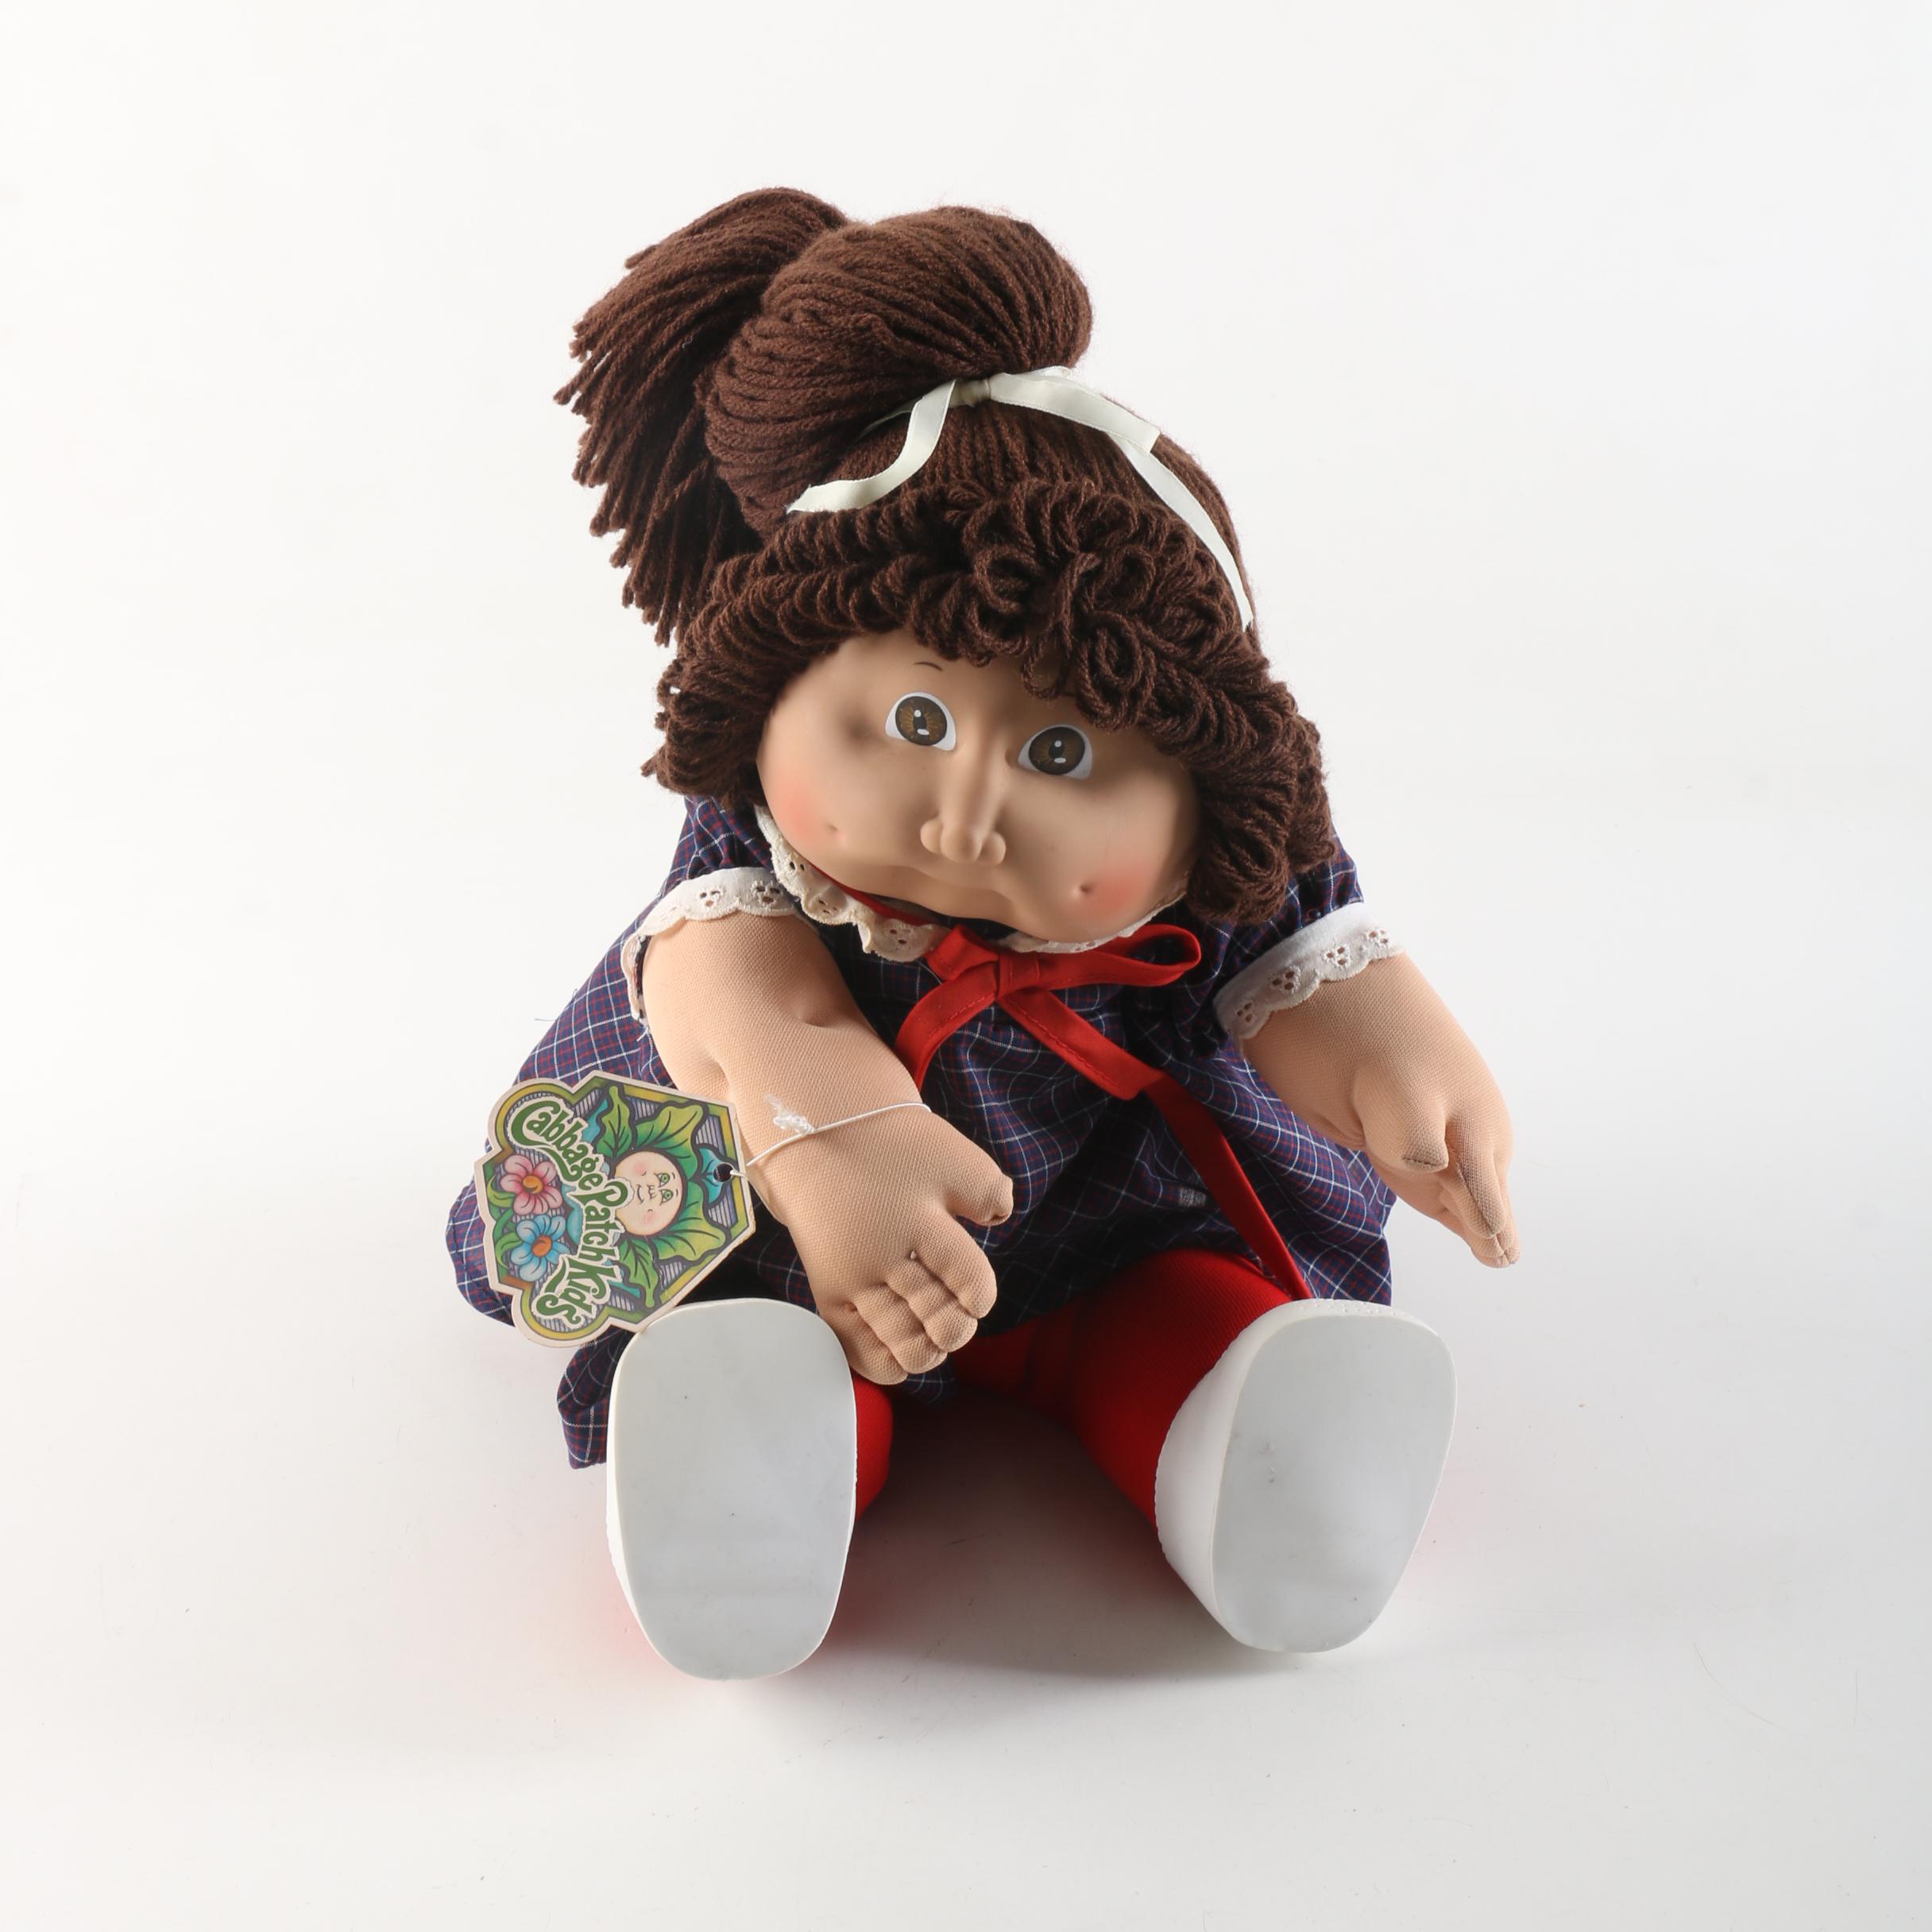 1985 coleco cabbage patch kid